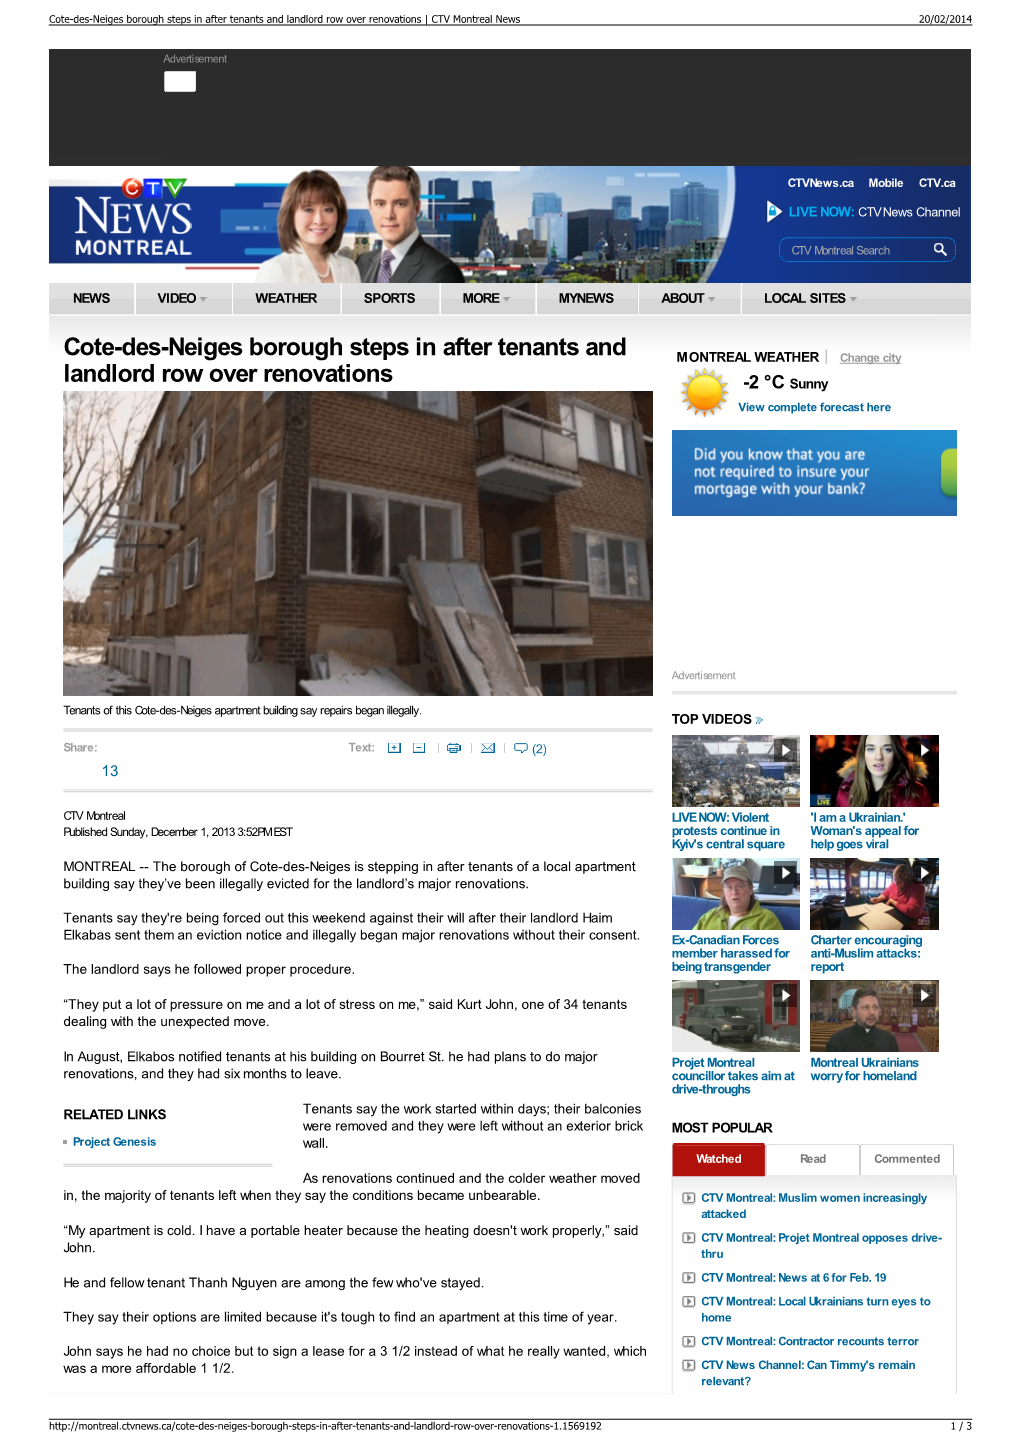 Cote-Des-Neiges Borough Steps in After Tenants and Landlord Row Over Renovations | CTV Montreal News 20/02/2014